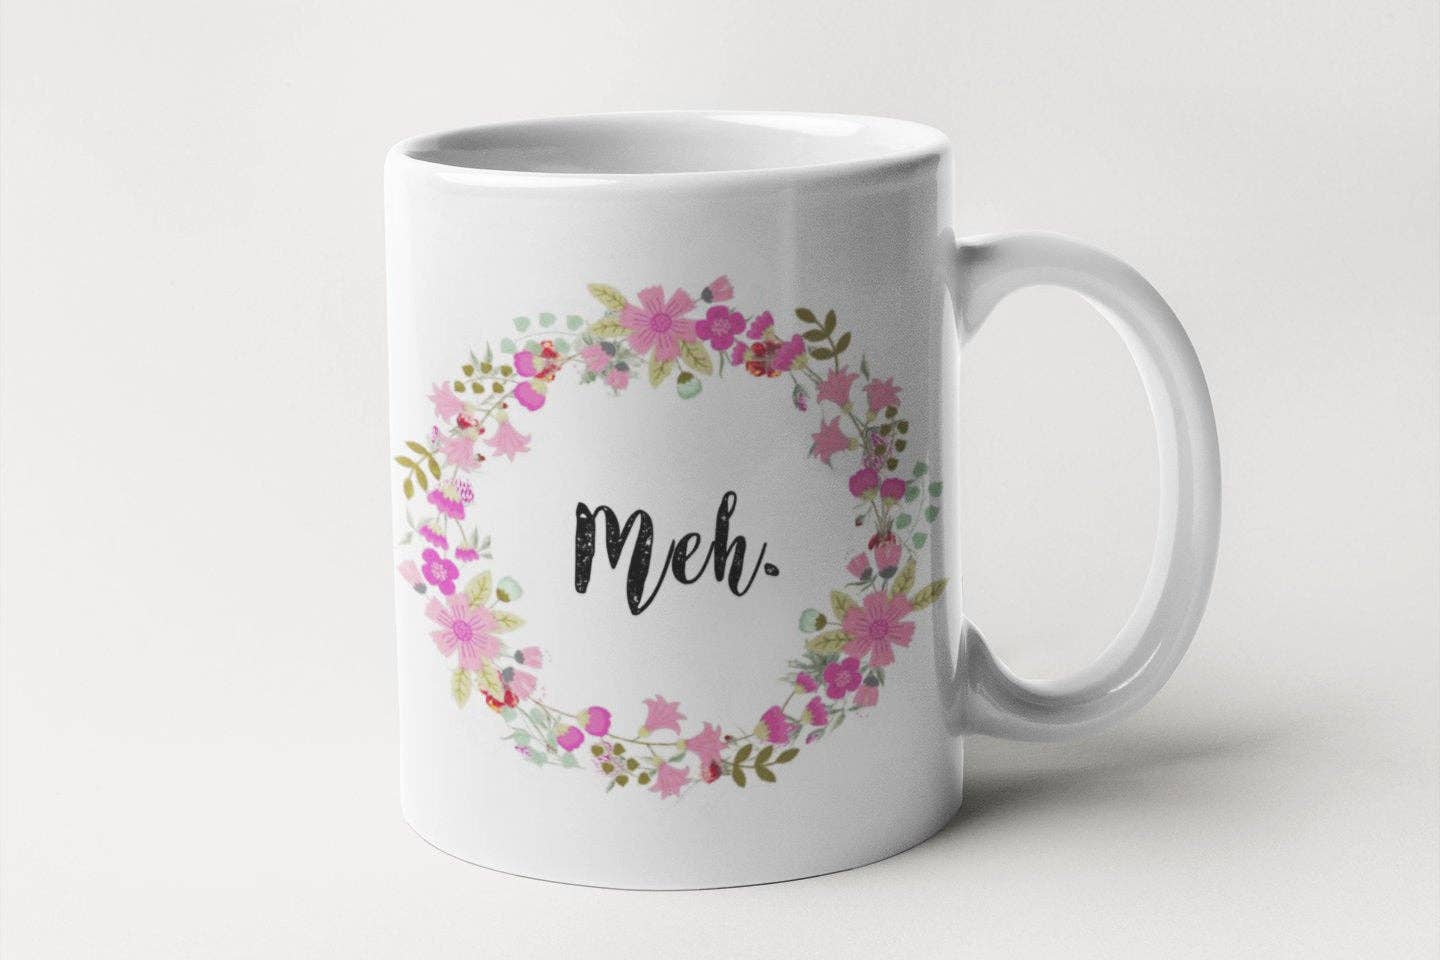 MEH - Floral Delicate And Fancy Coffee Mug for Non-Morning People